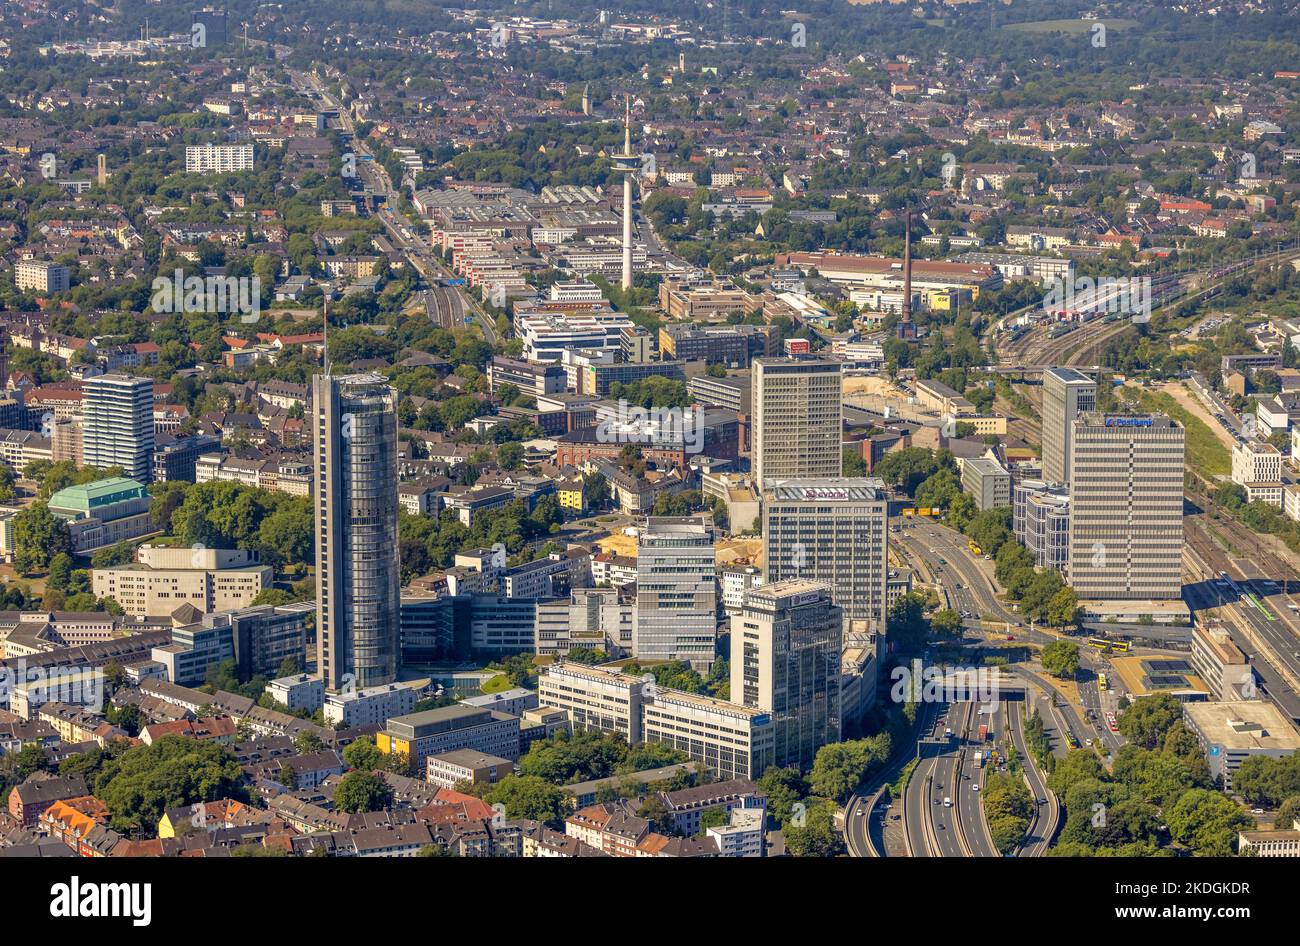 Aerial view, location view city, construction site demolition Ypsilon house of RWE headquarters Essen in Huyssenallee, planned new building for office Stock Photo